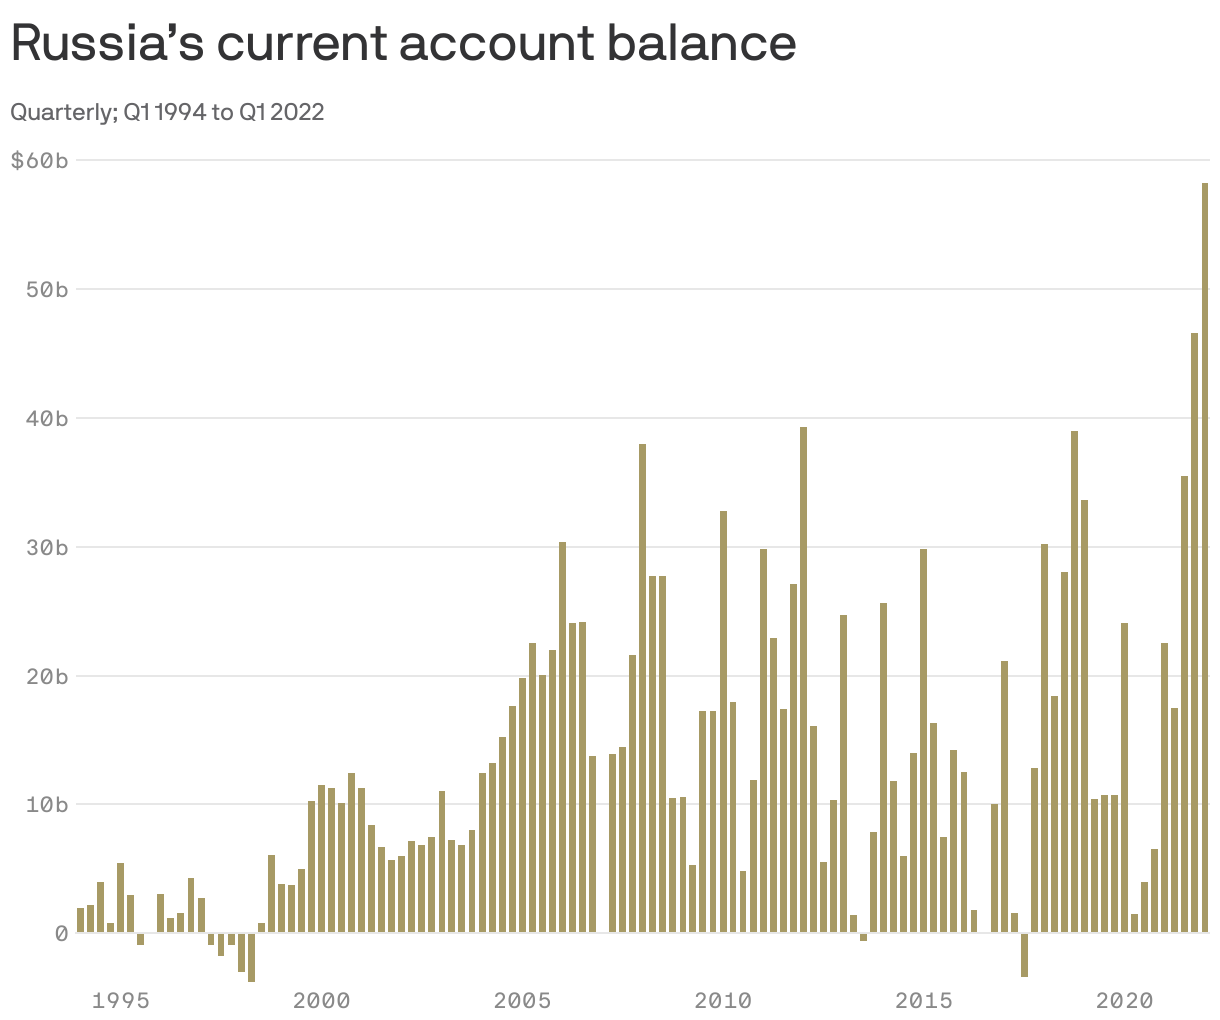 Russia’s current account balance